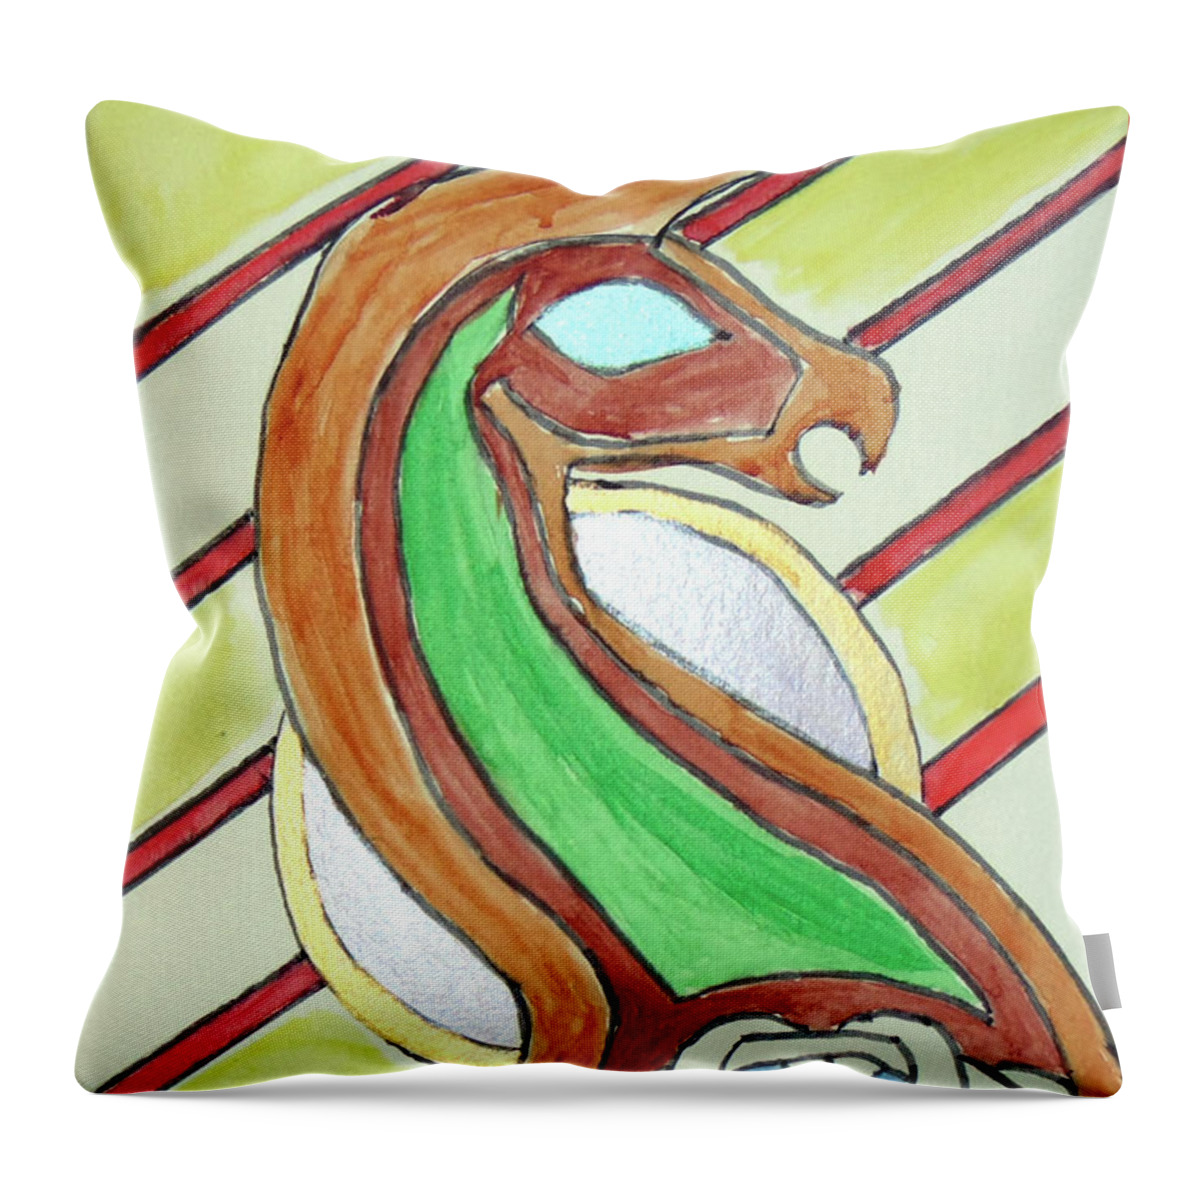 Dragon Throw Pillow featuring the painting Celtic Dragon by Loretta Nash